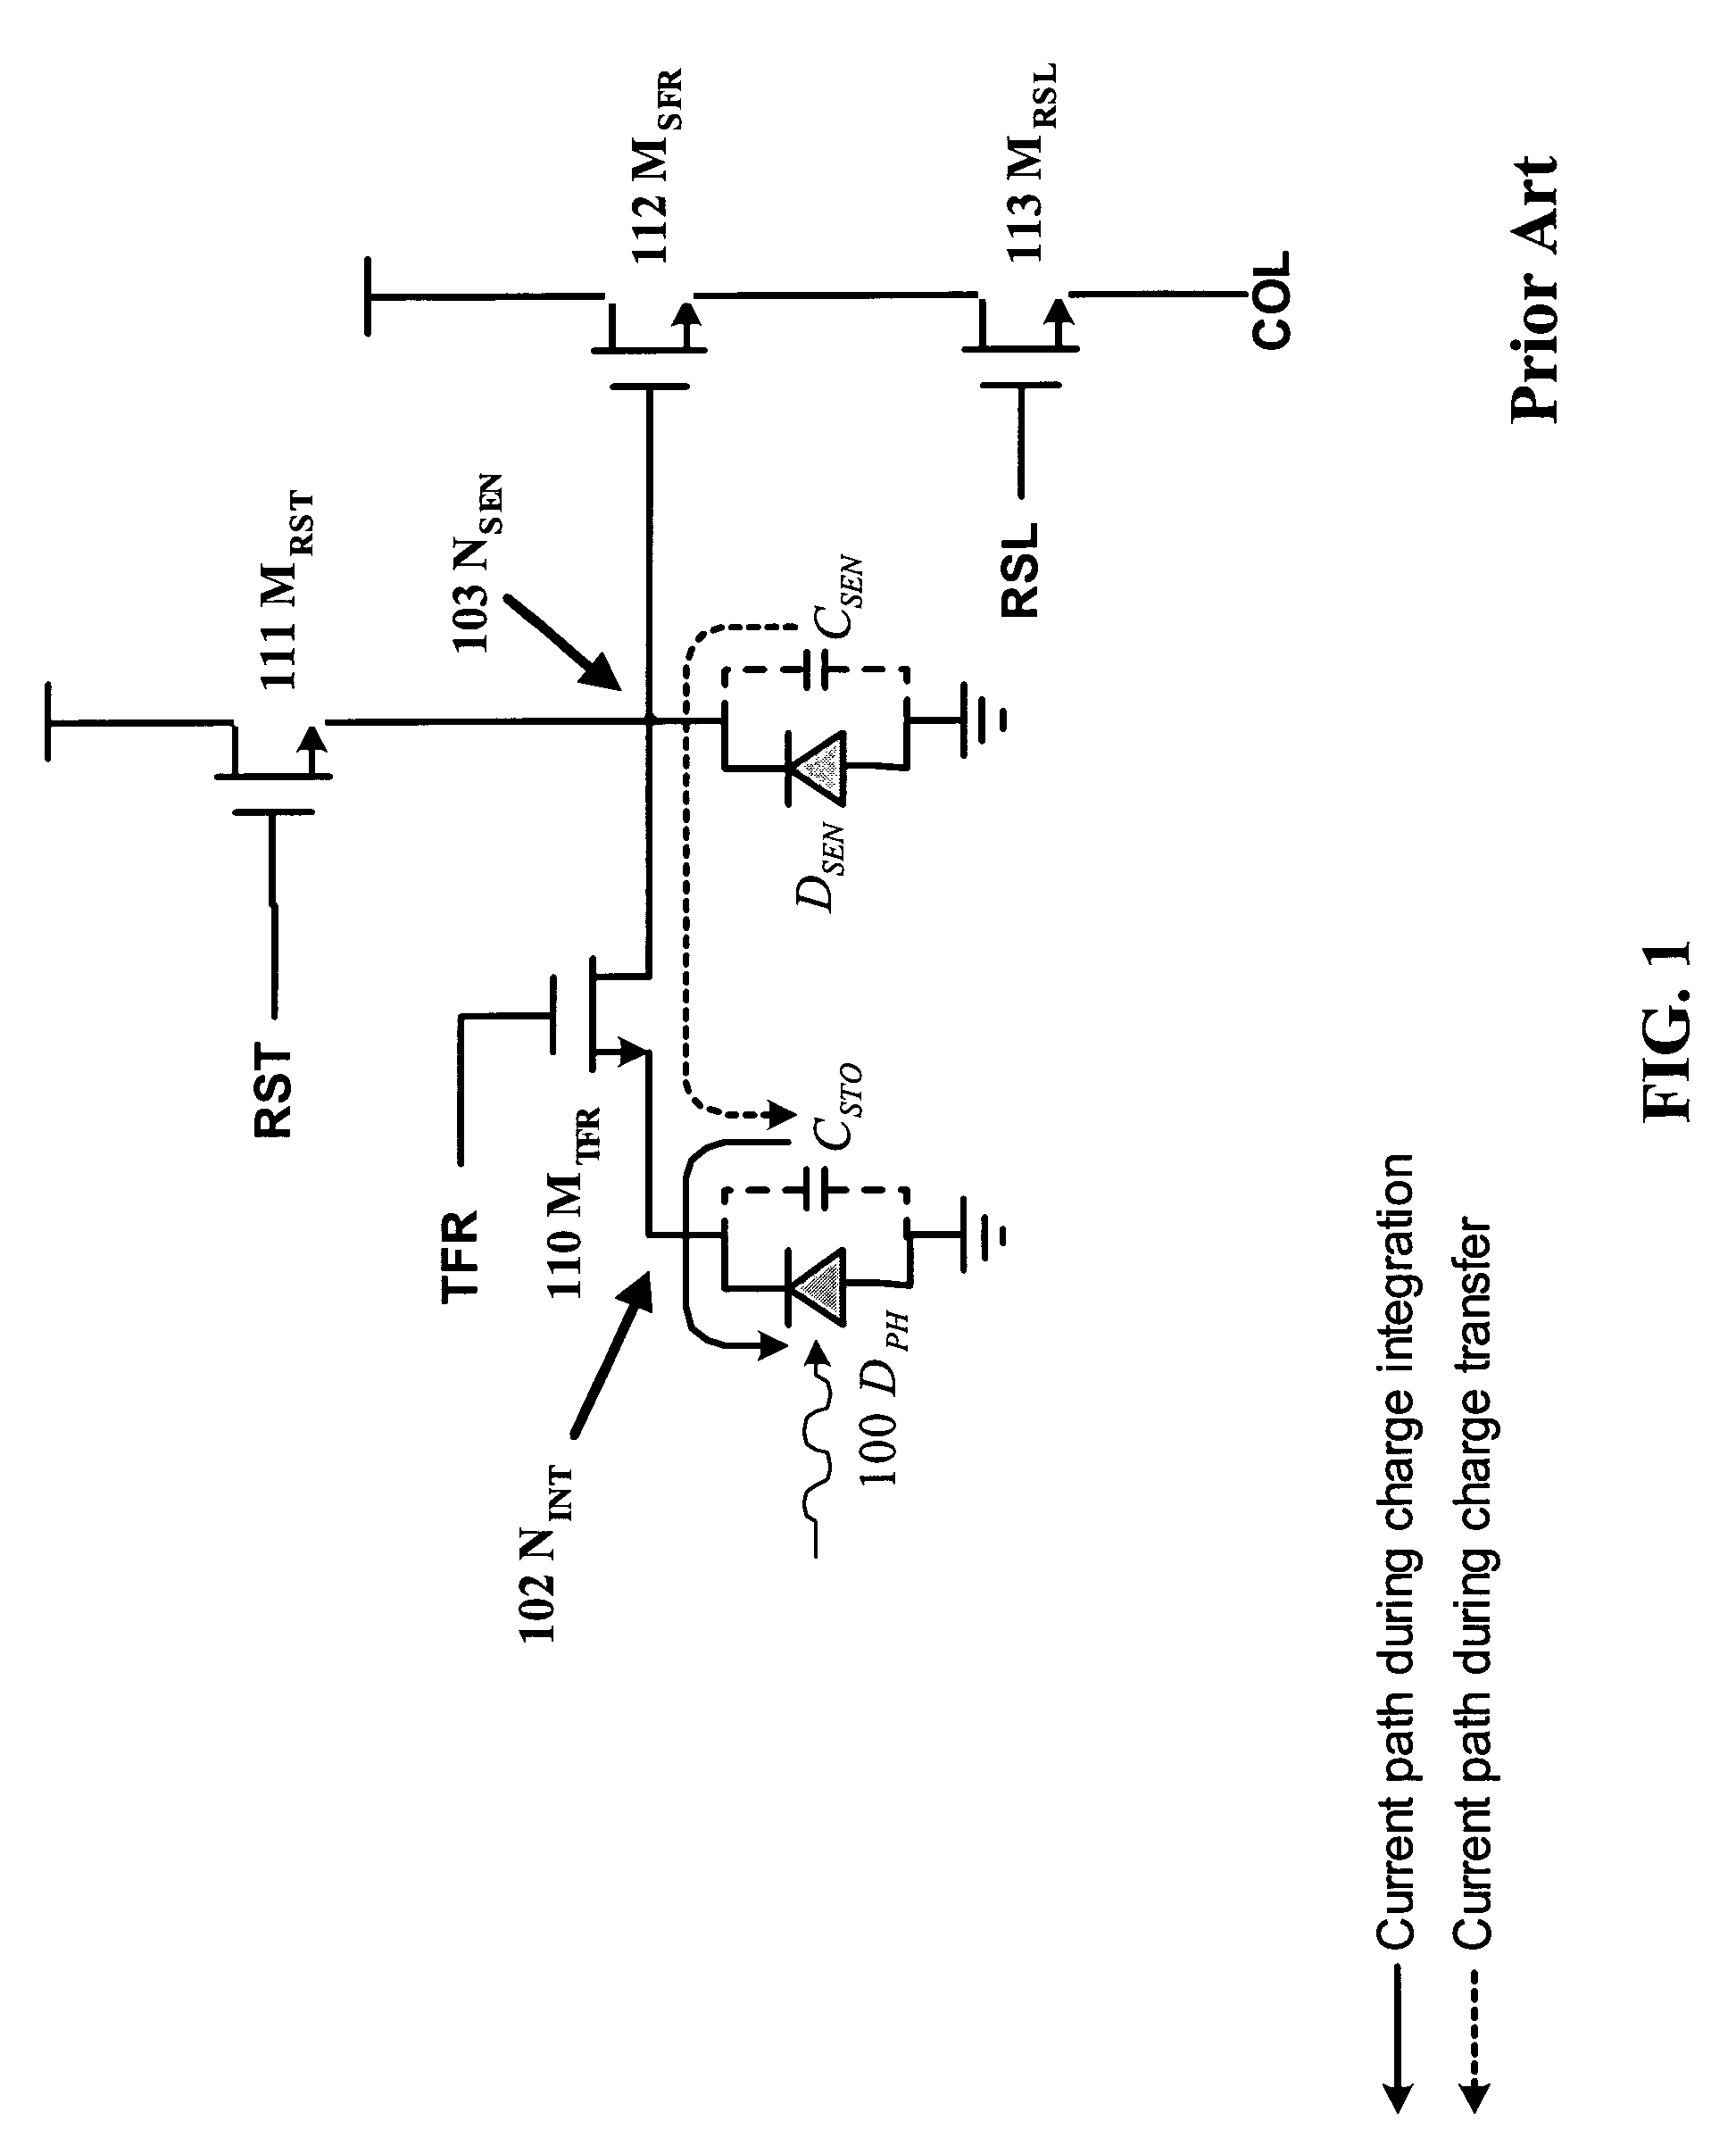 CMOS sensor with electrodes across photodetectors at approximately equal potential